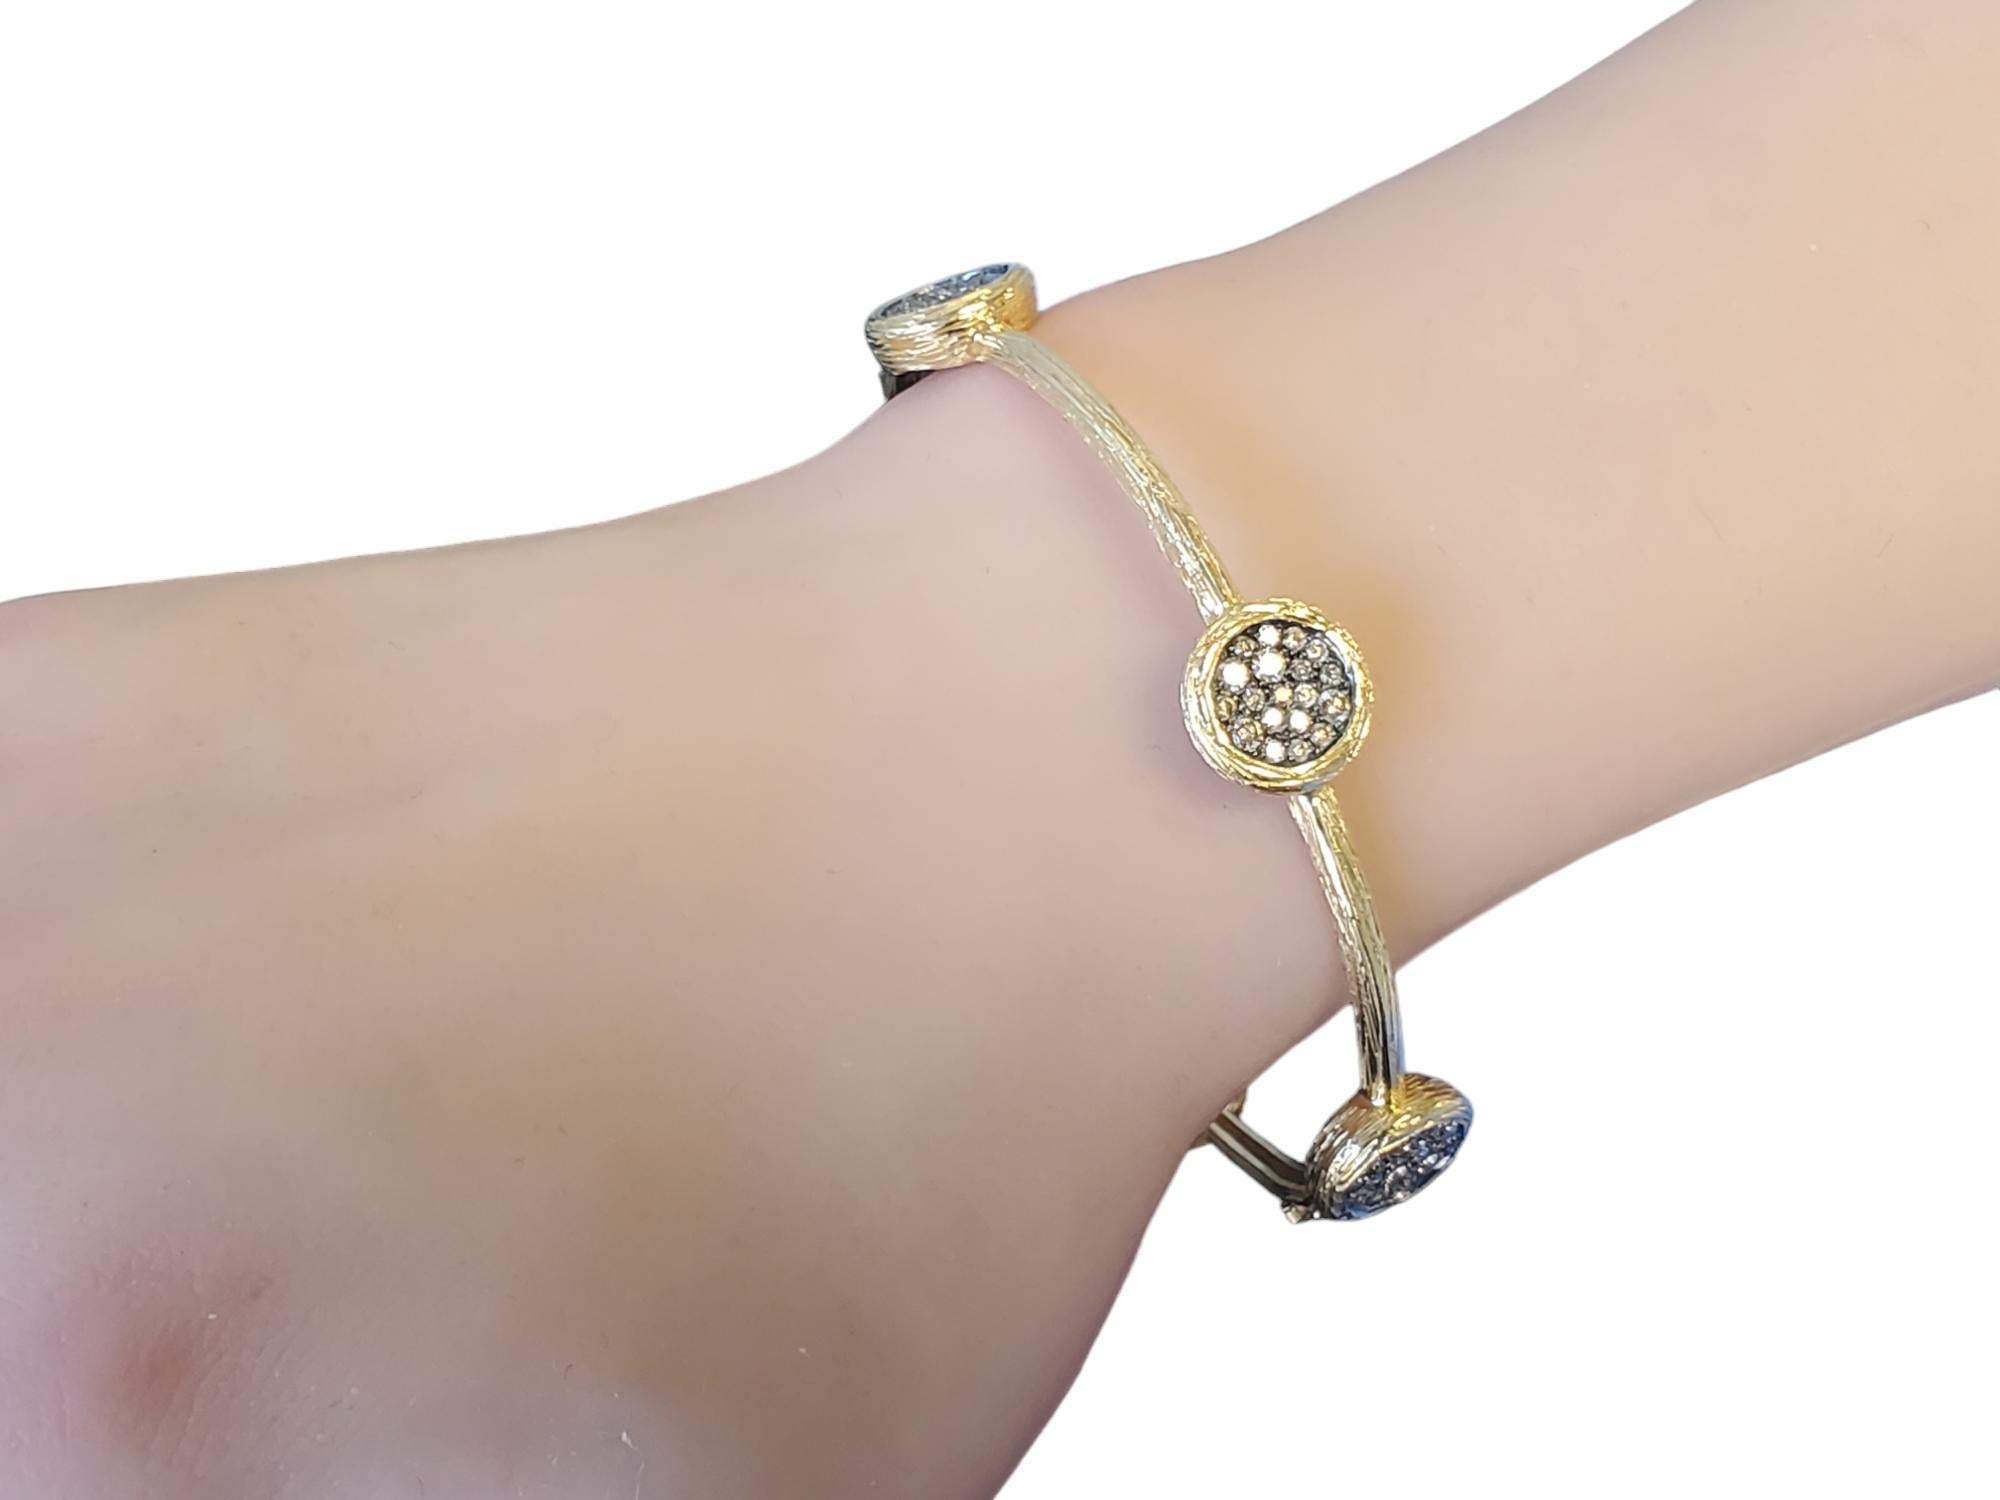 Listed is a 14k yellow gold bangle with nice mixed shade chocolate color diamonds. This designer bracelet has a really nice and unique finish to the metal, the craftsmanship is outstanding. It features 1.59tcw round brilliant diamonds that are SI in